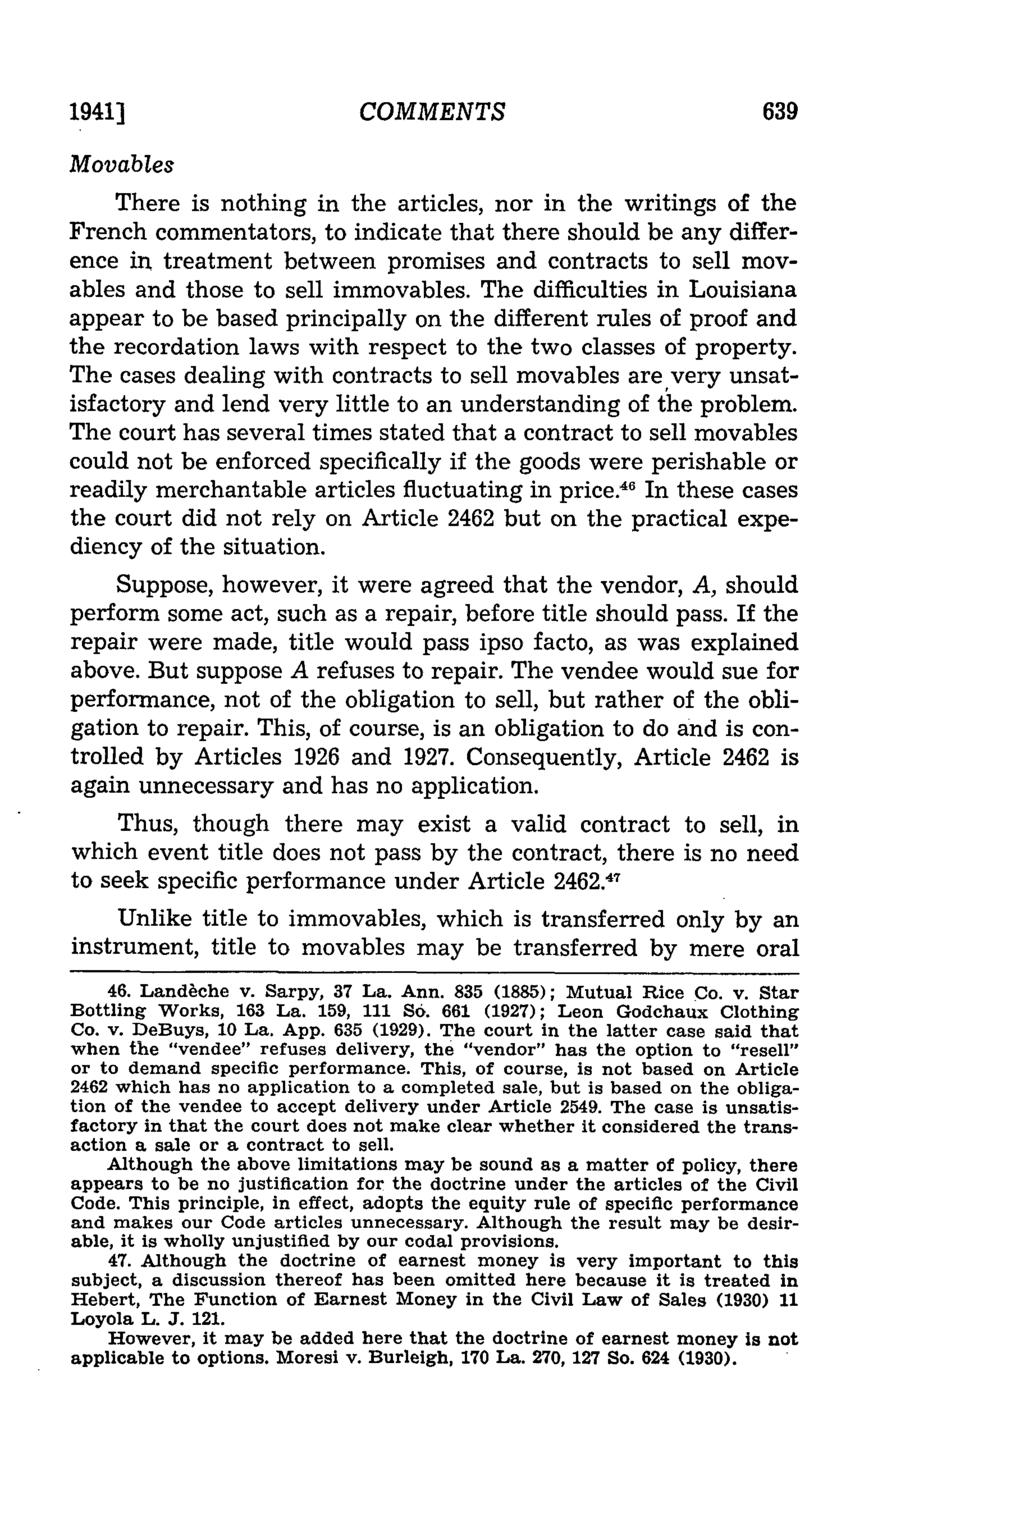 1941] COMMENTS Movables There is nothing in the articles, nor in the writings of the French commentators, to indicate that there should be any difference in treatment between promises and contracts